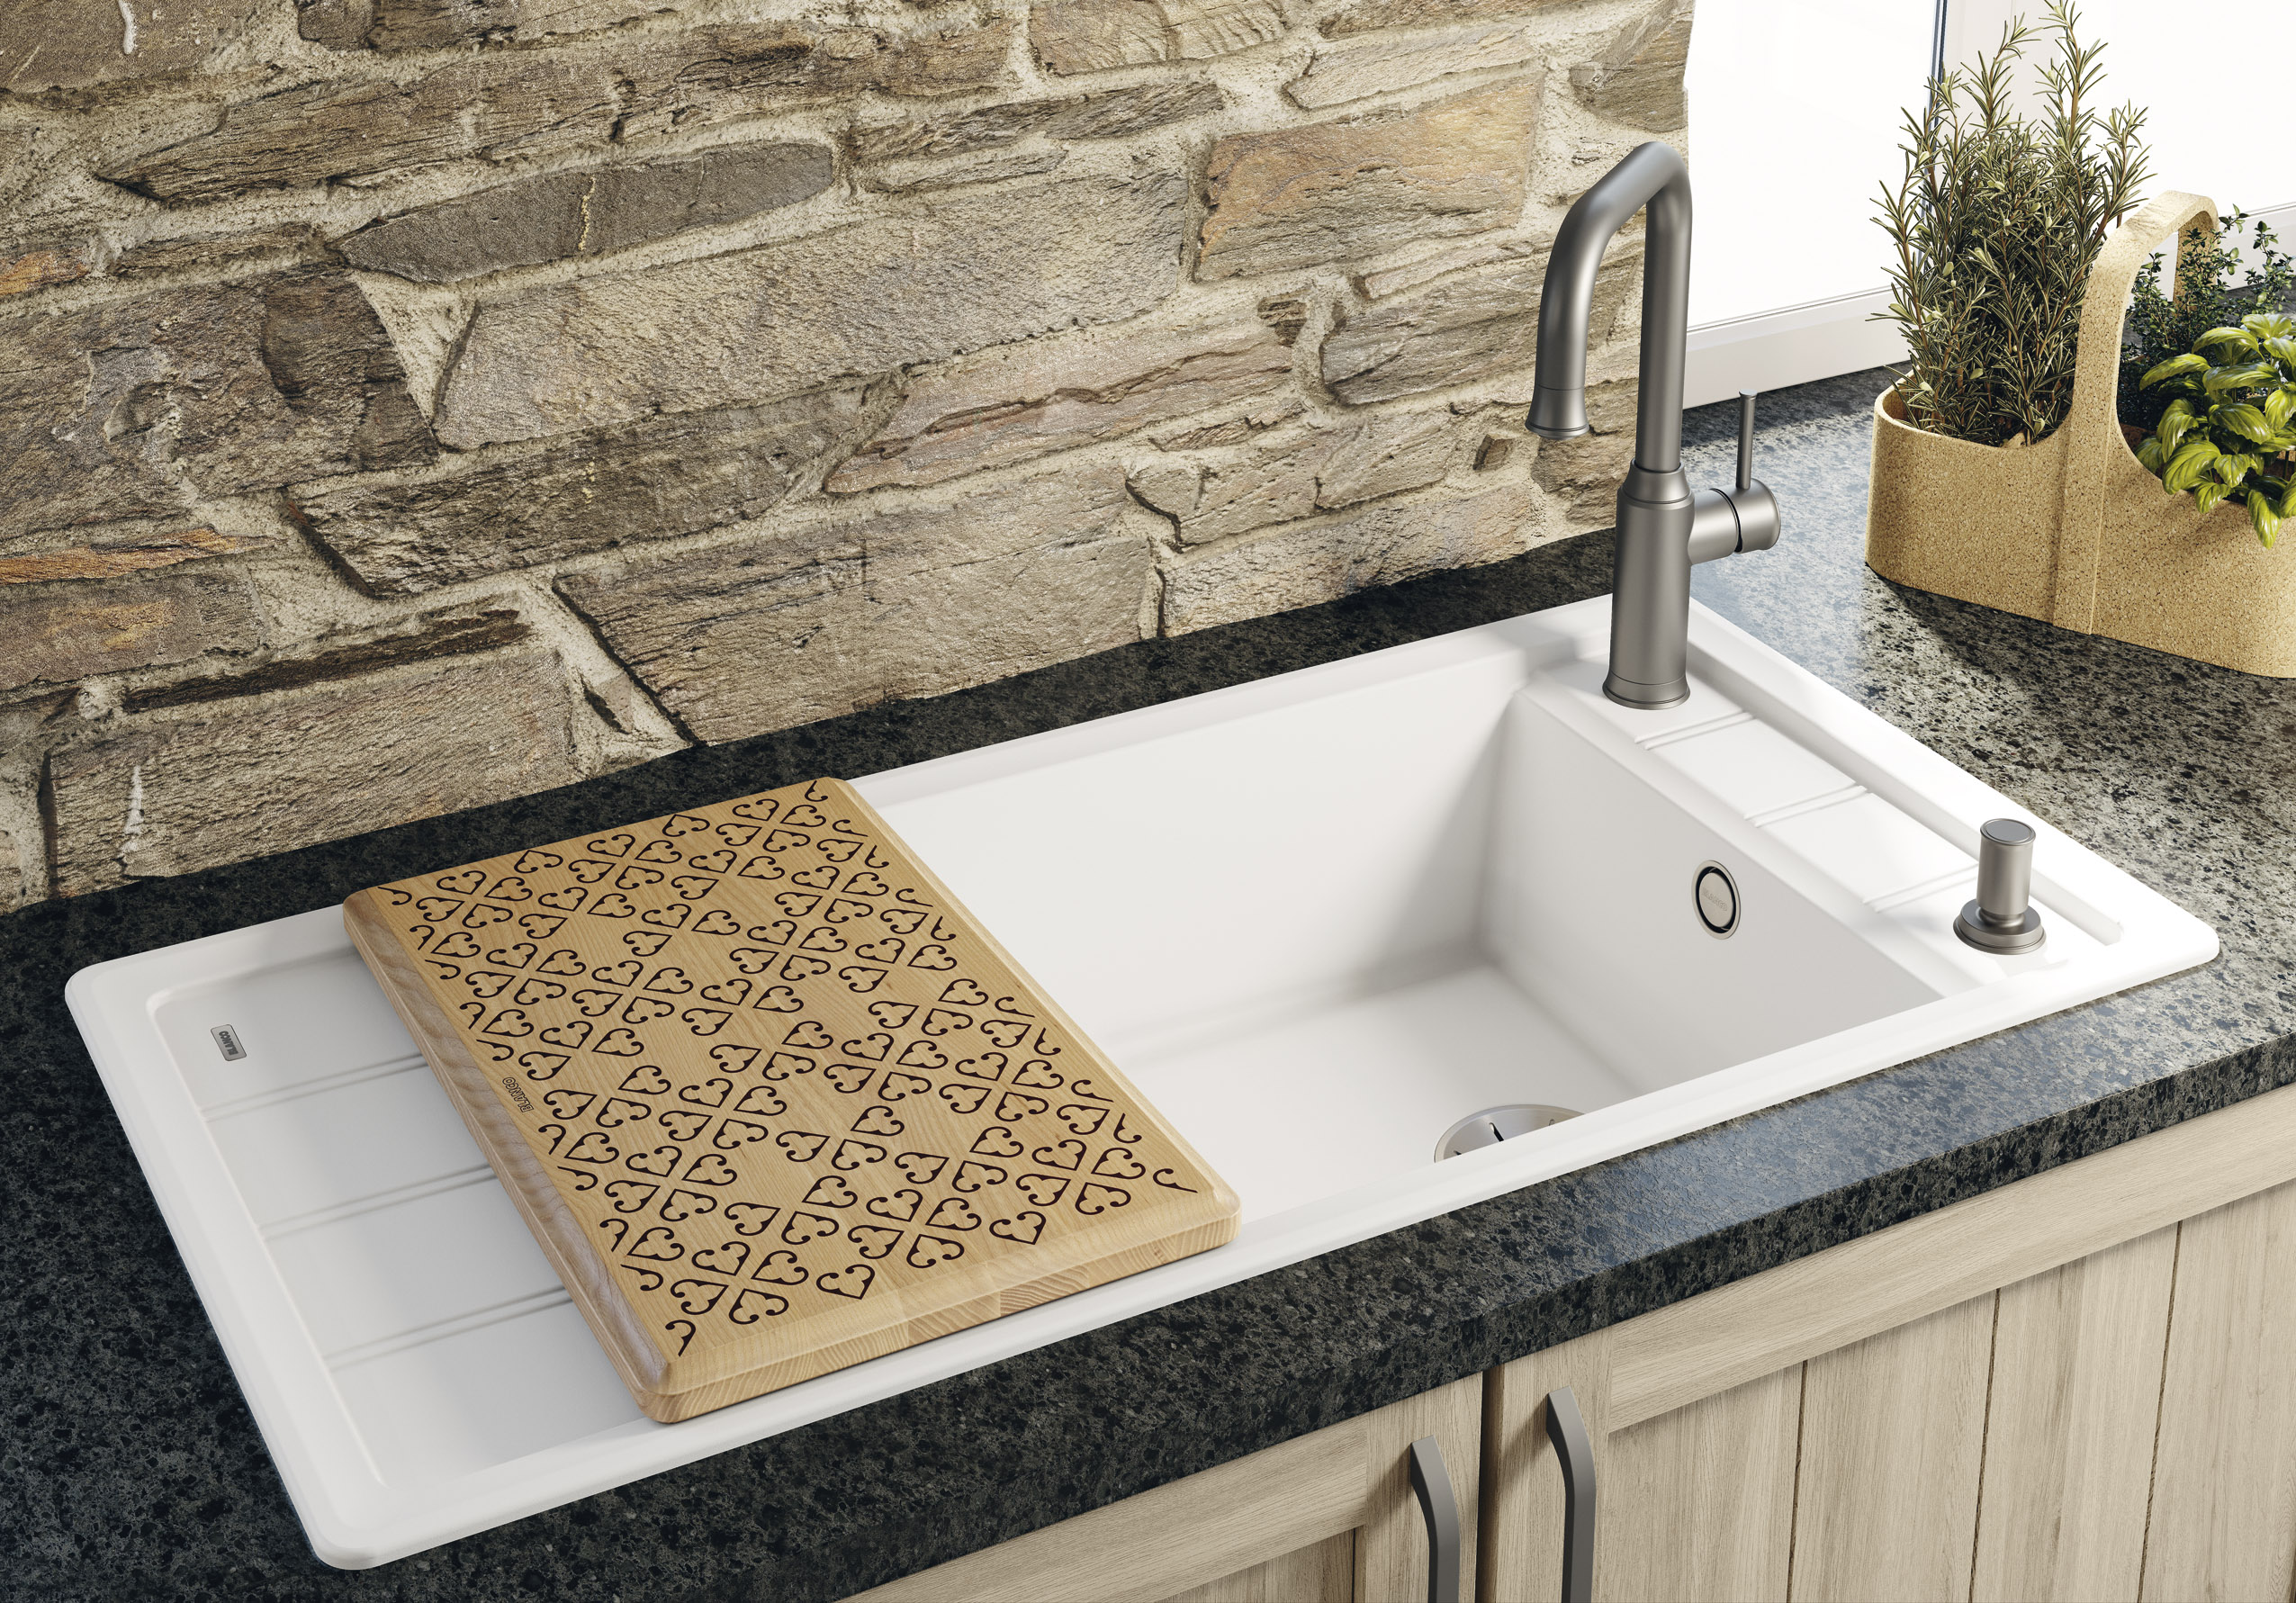 The sink for fans of the country-house look: the Blanco Faron XL 6 S sink has particular appeal.